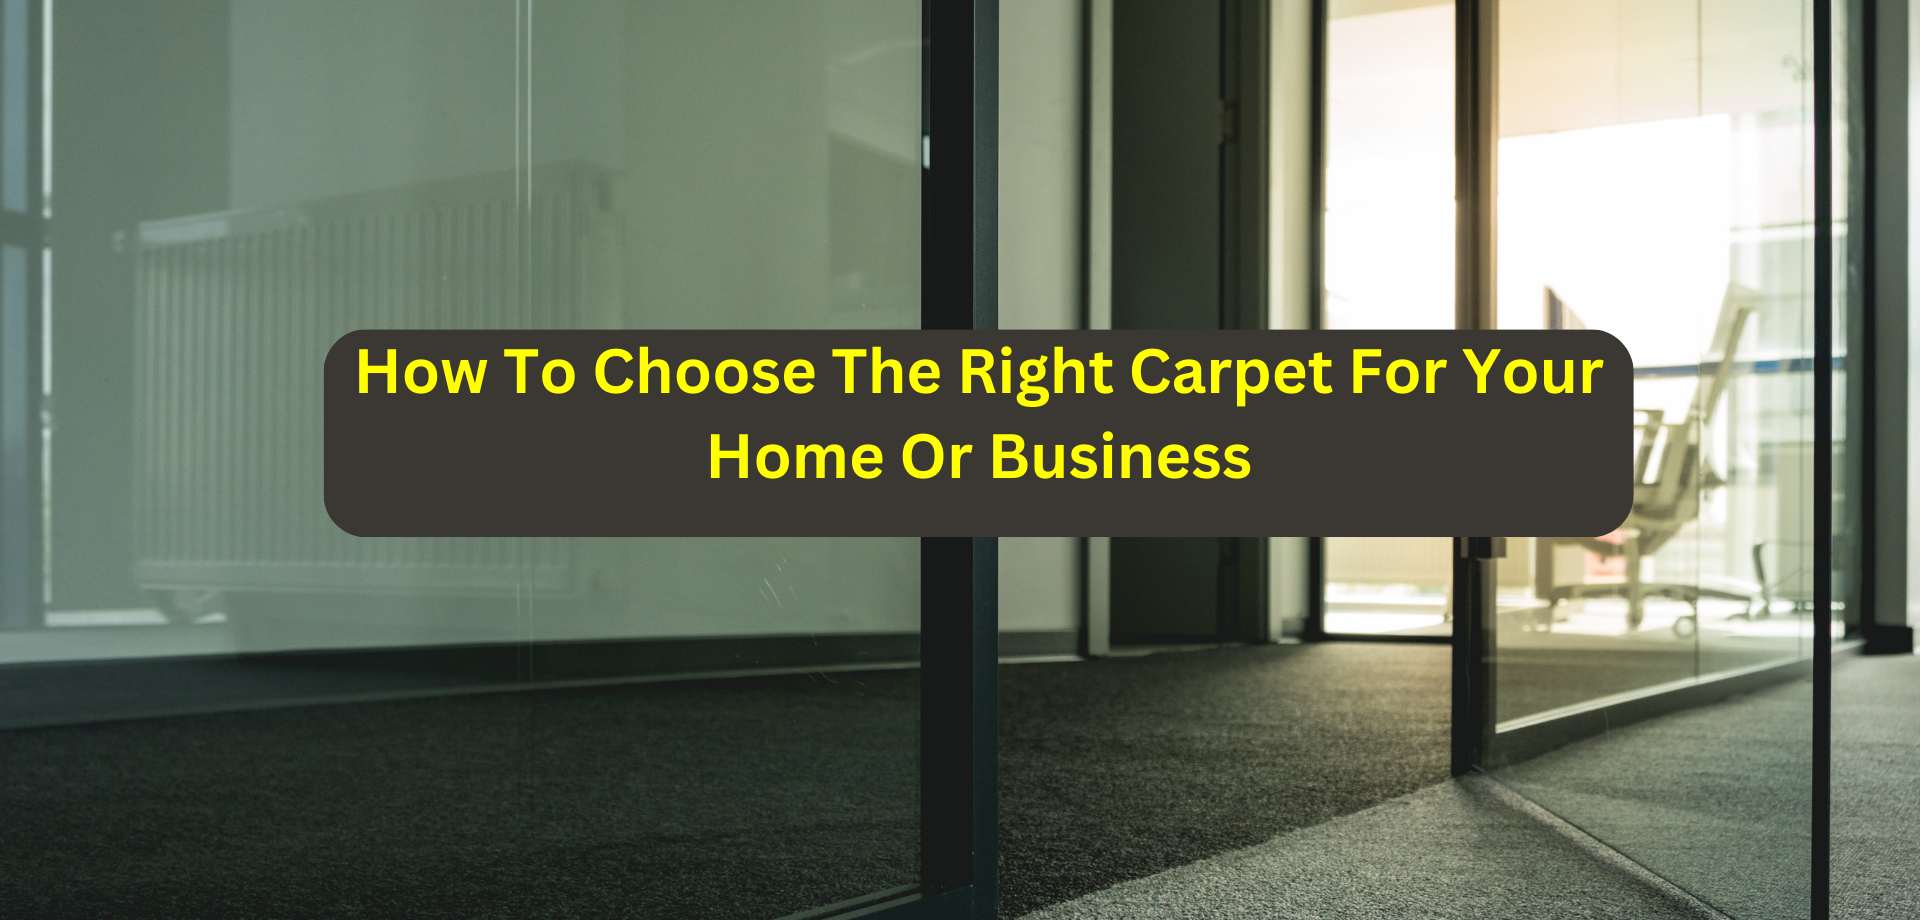 How To Choose The Right Carpet For Your Home Or Business